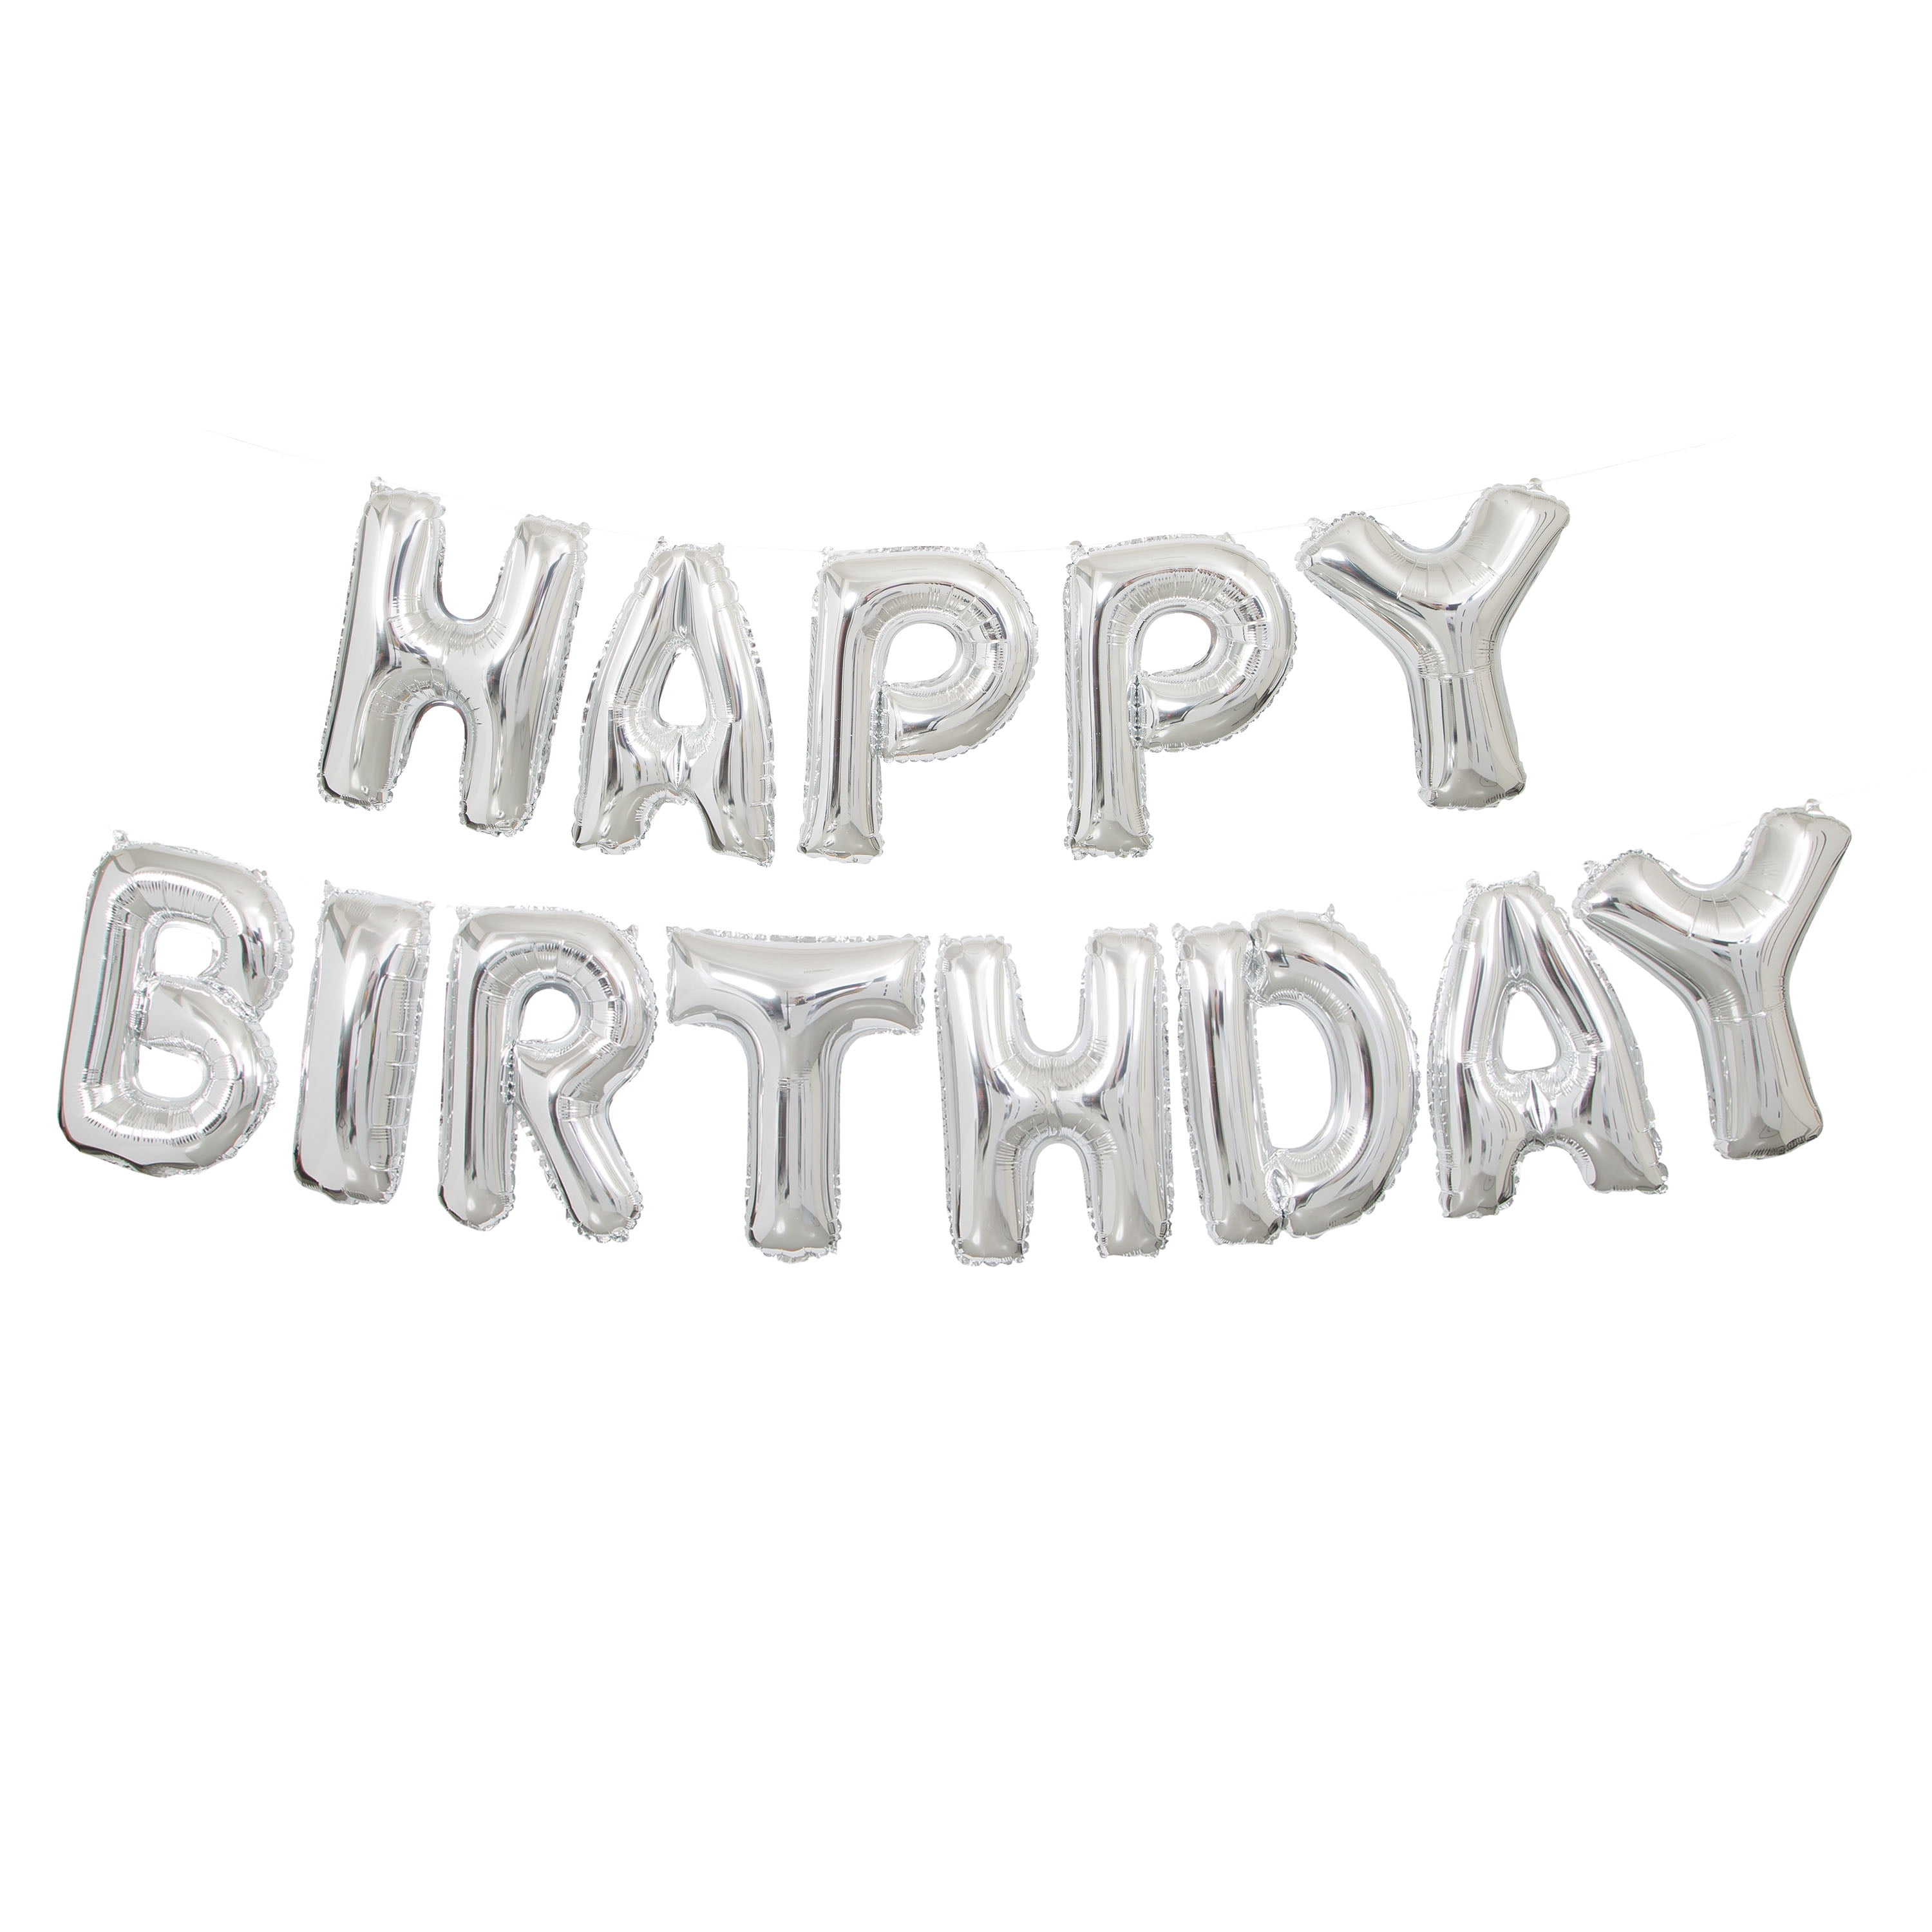 Malayas Self Inflating Happy Birthday Banner Balloon Bunting Silver 16 inch Letters Foil for Party Decoration 16 Birthday Balloons Banner Silver Hanging Alphabet Letter Balloons Party Supplies